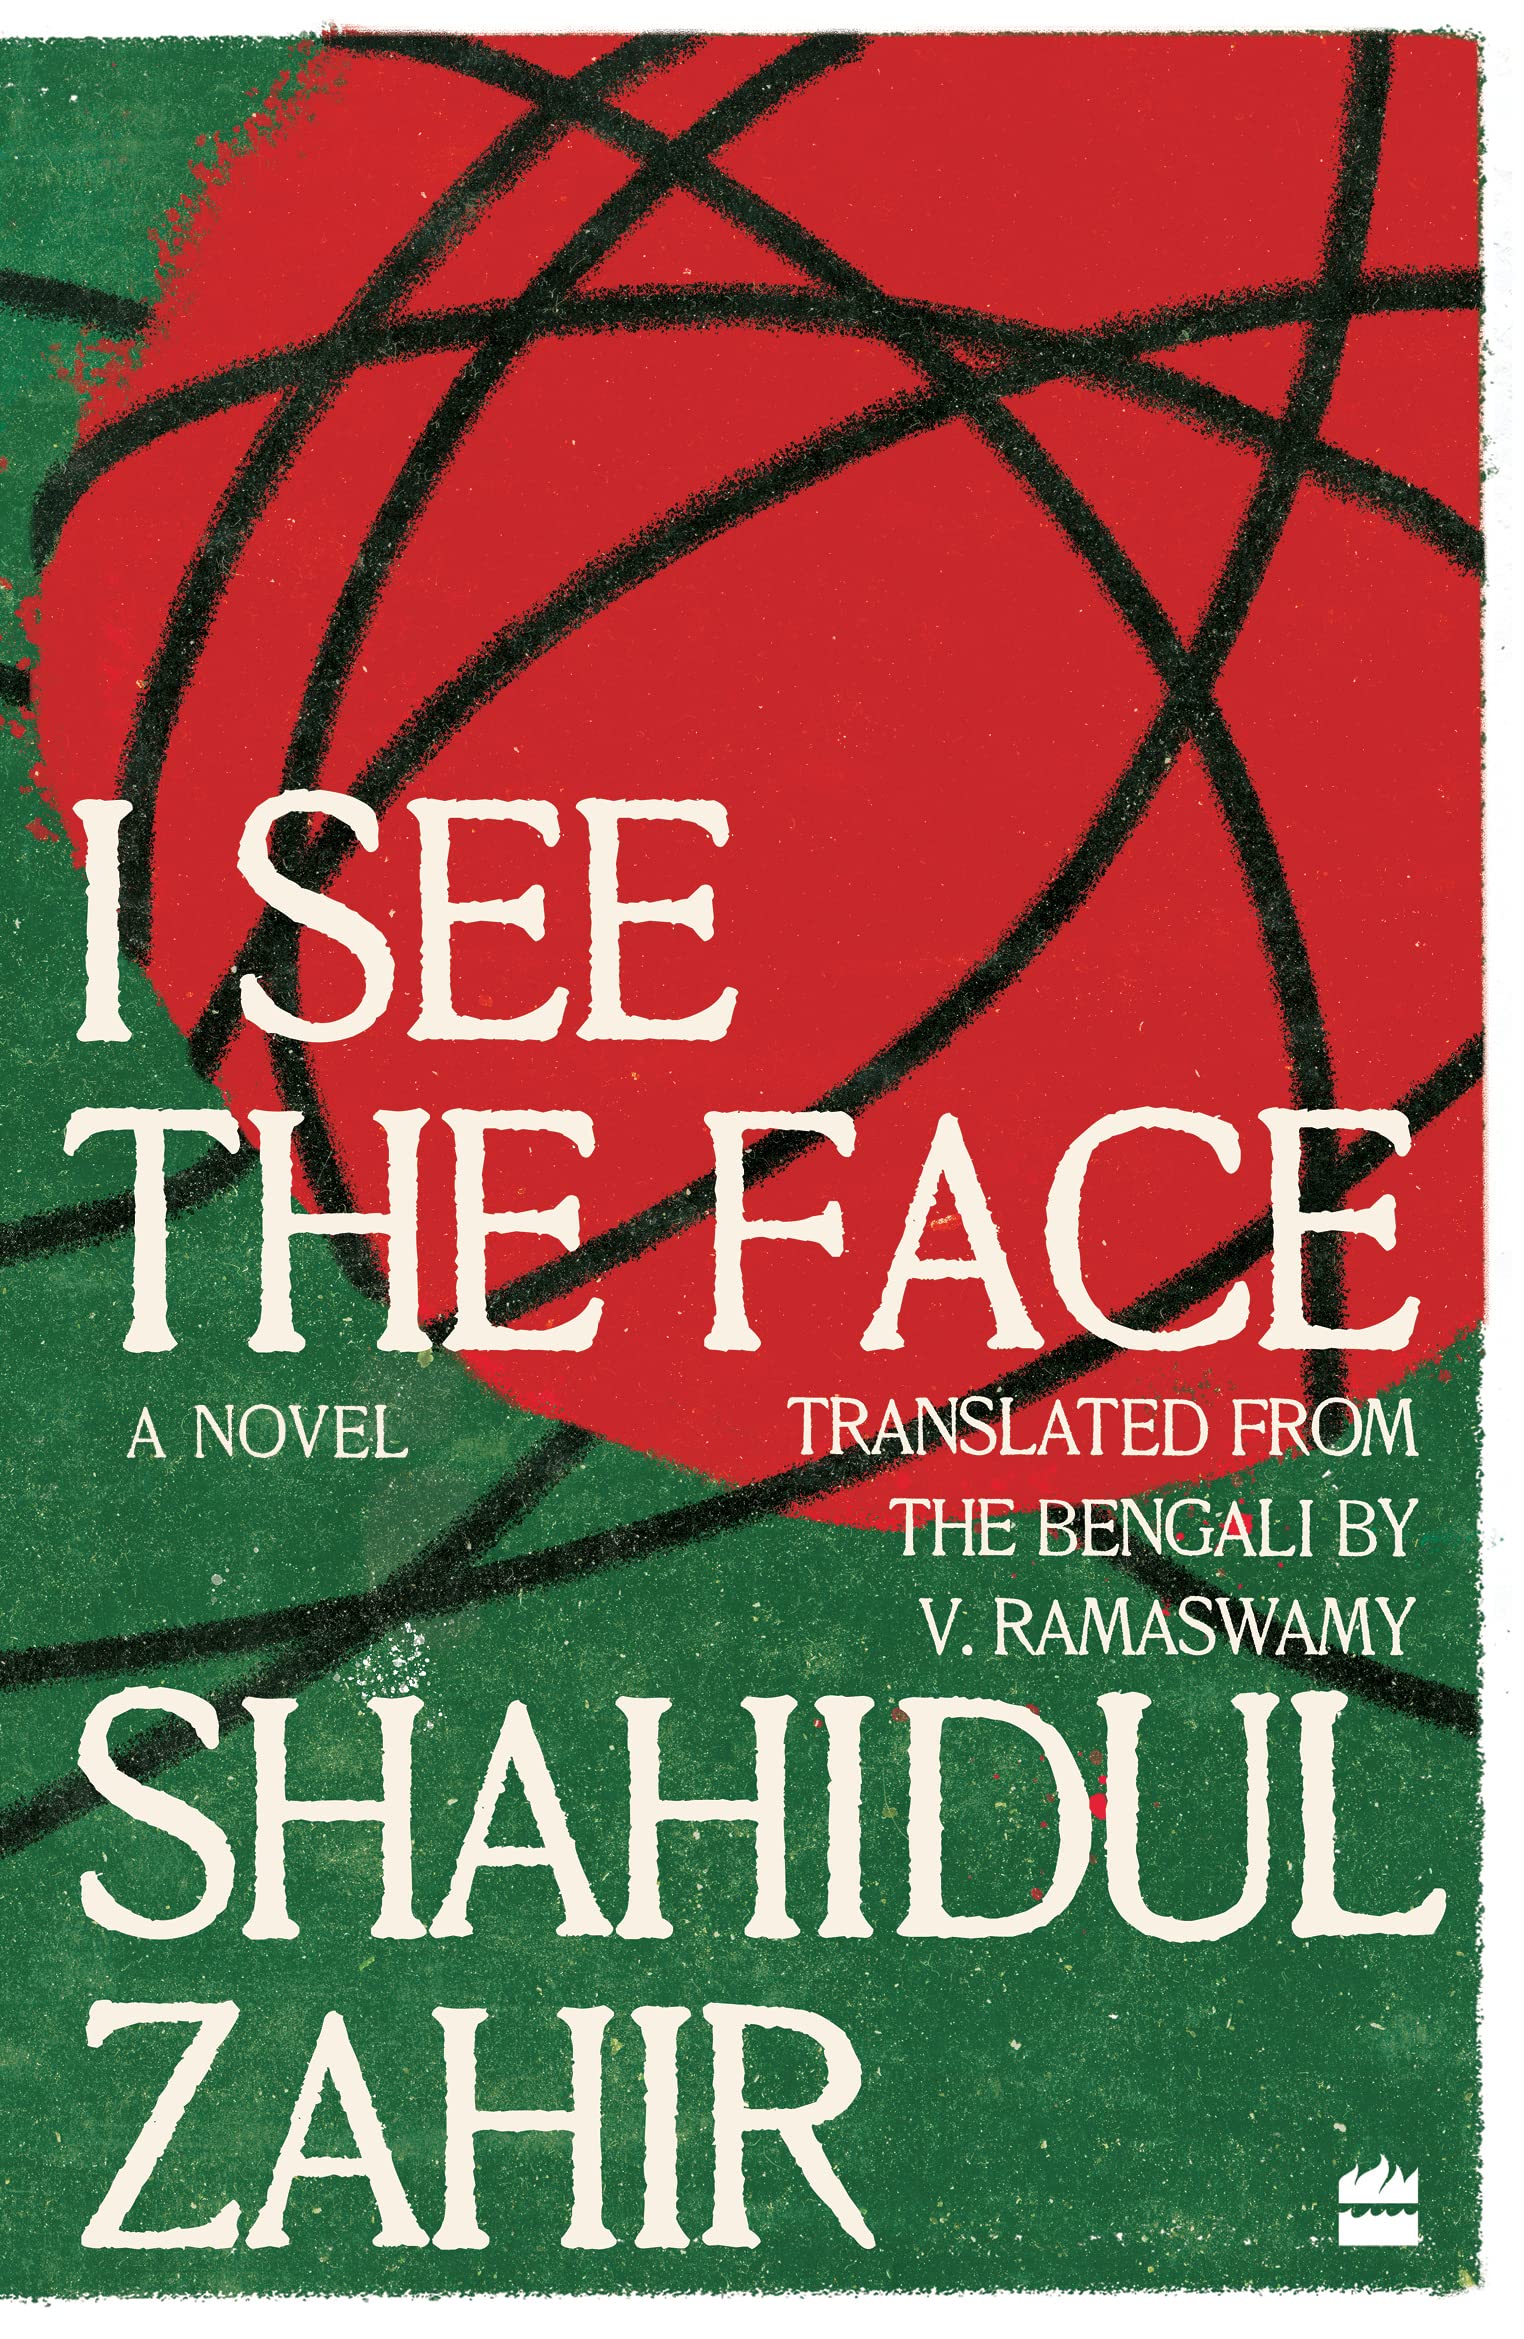 "I See The Face": This is an alternative telling of the story, or history, of Bangladesh, beginning with the War of Liberation in 1971